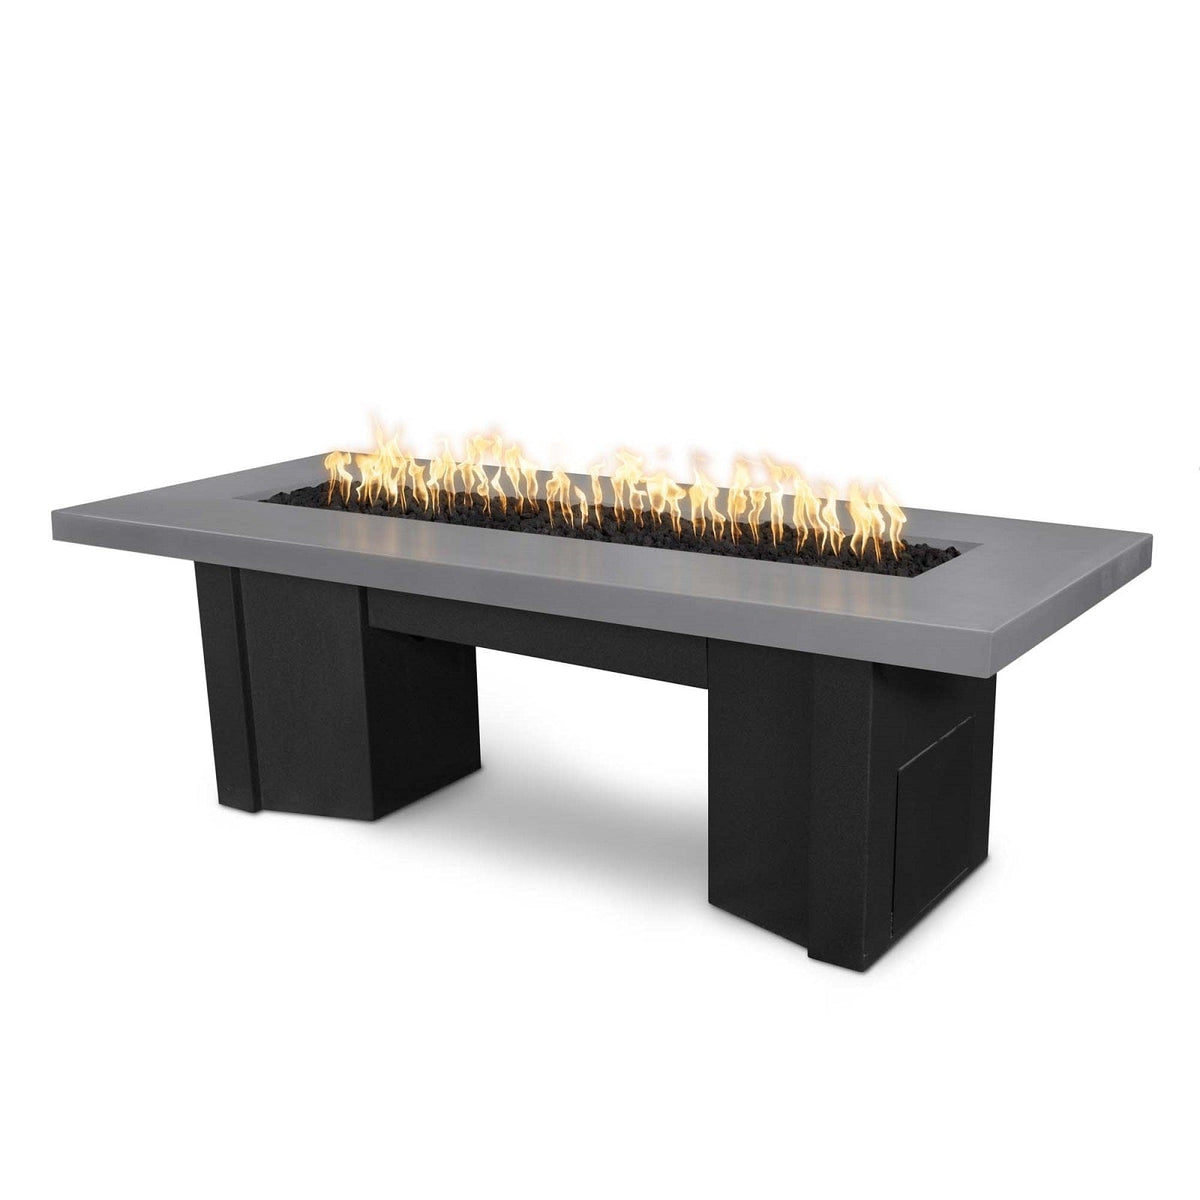 The Outdoor Plus Fire Features Natural Gray (-NGY) / Black Powder Coated Steel (-BLK) The Outdoor Plus 60&quot; Alameda Fire Table Smooth Concrete in Liquid Propane - Match Lit / OPT-ALMGFRC60-LP